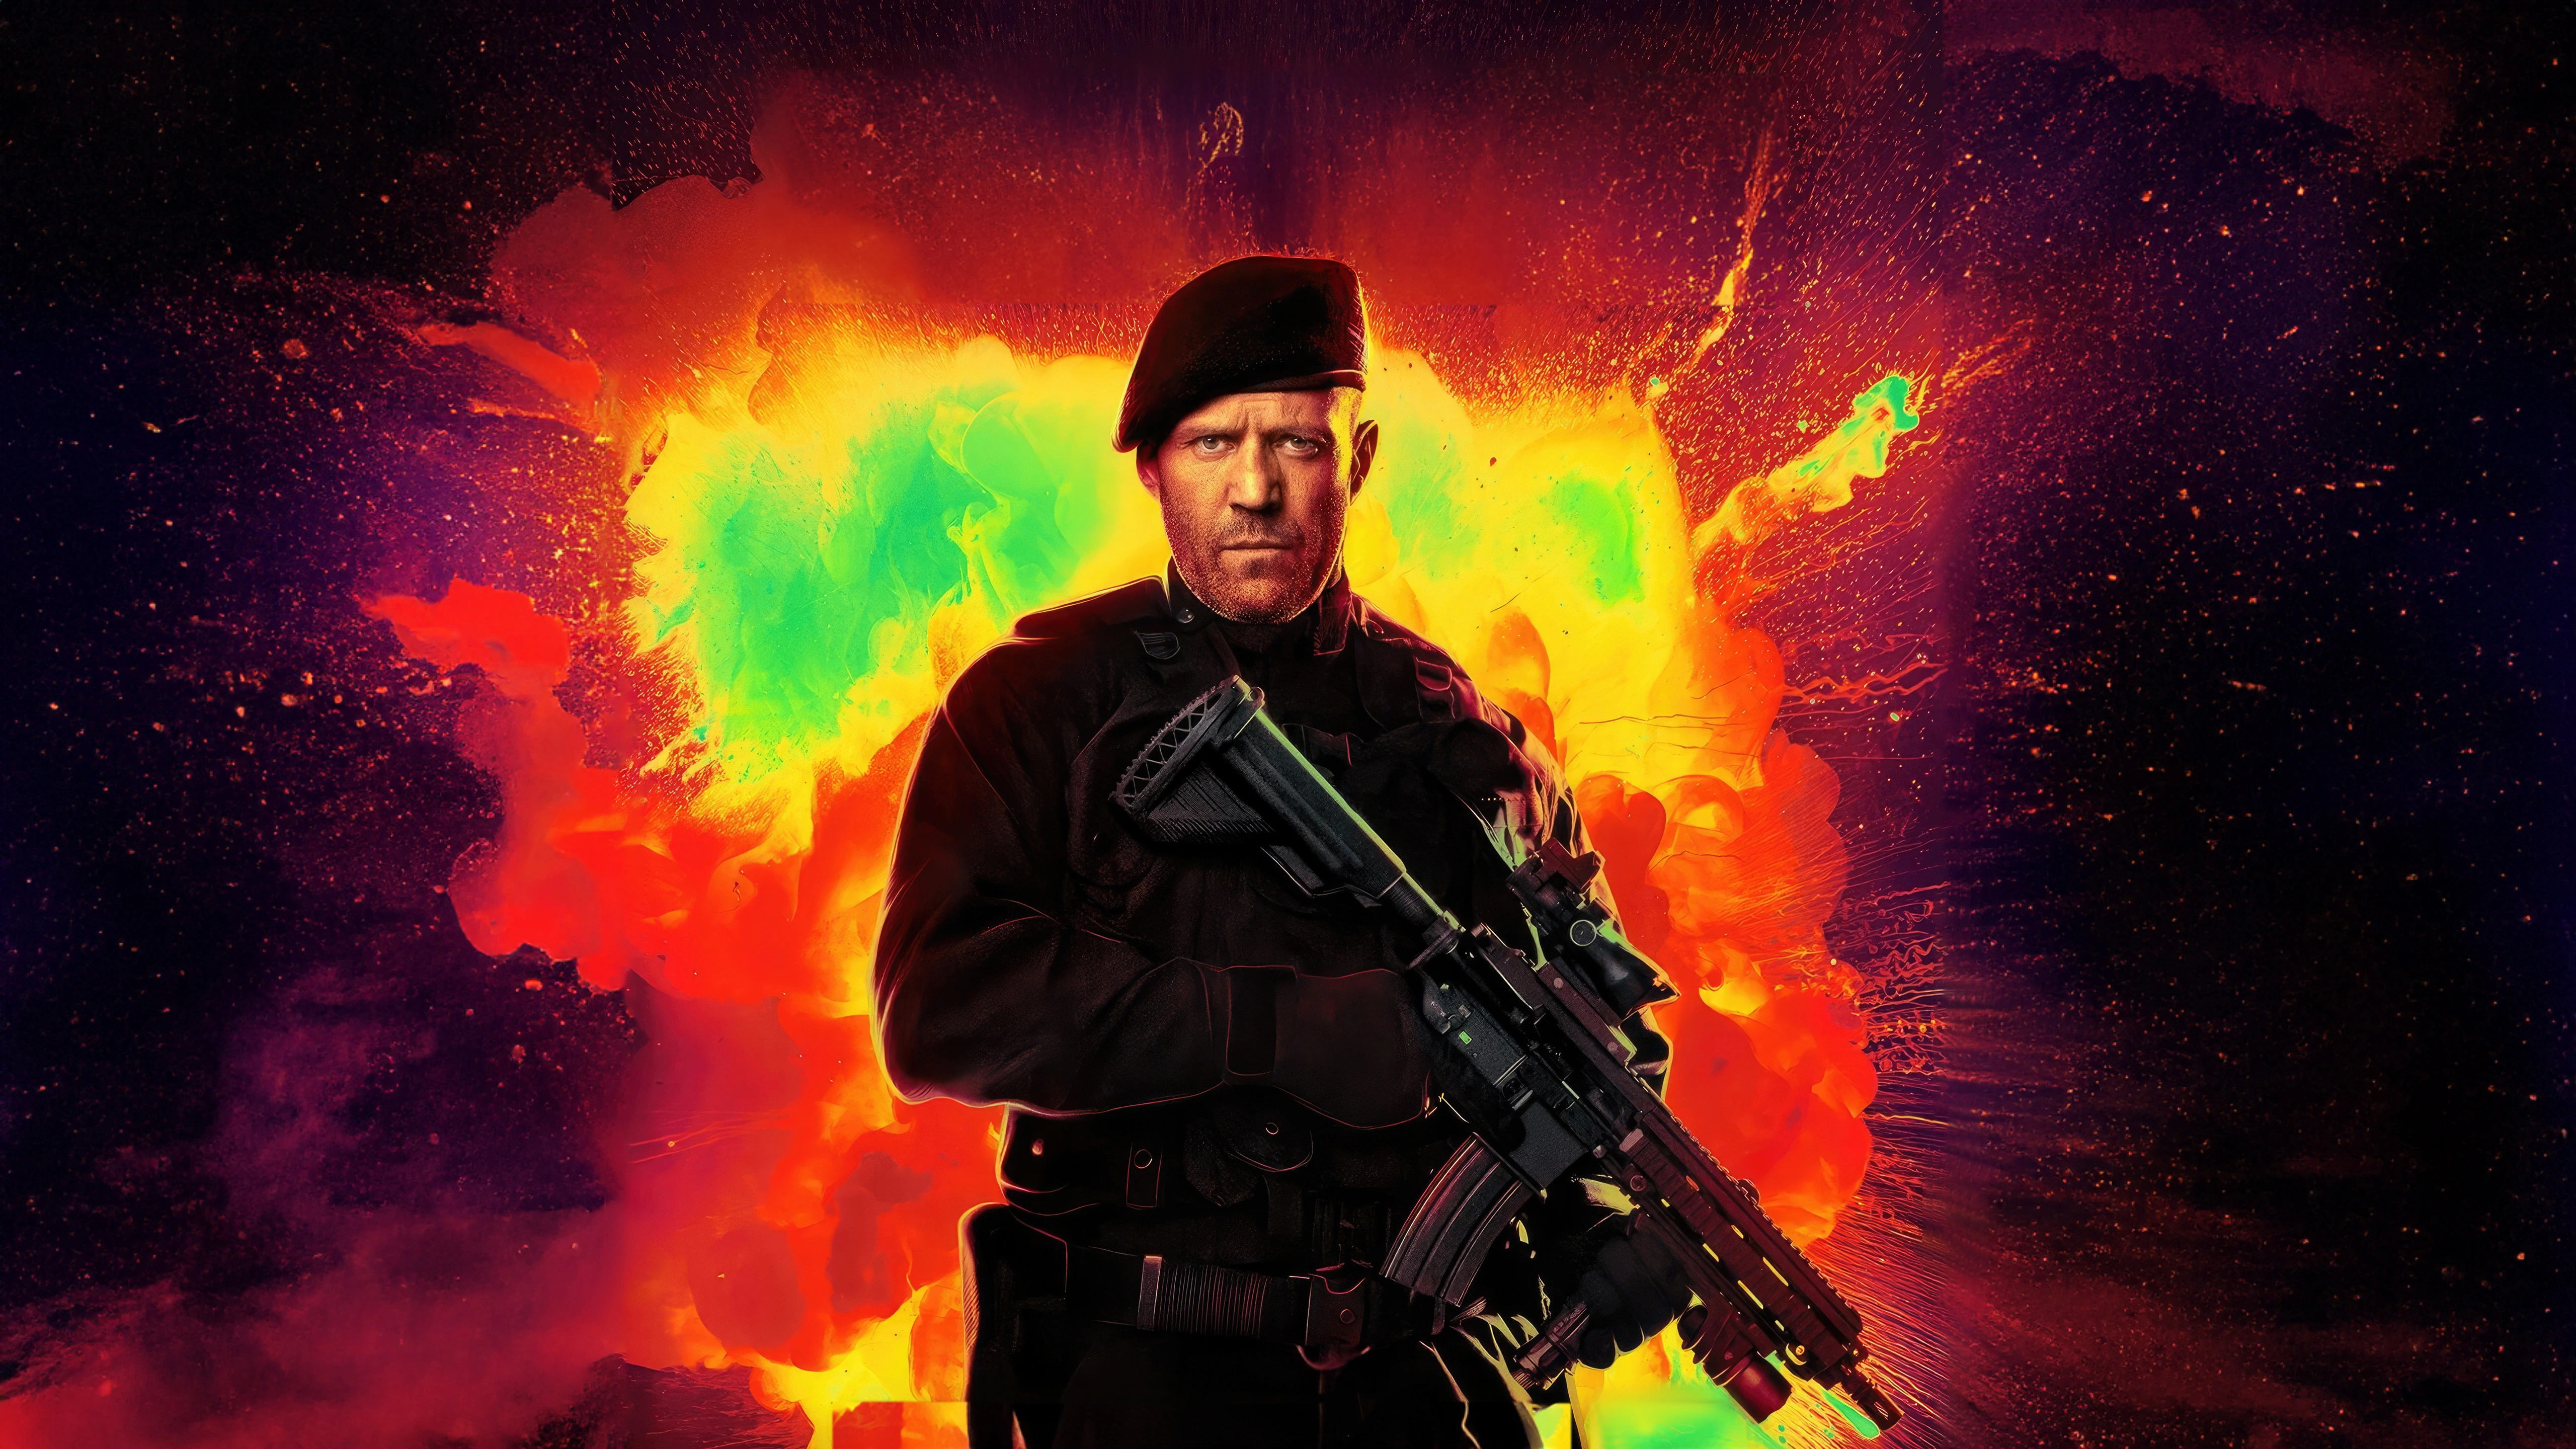 jason statham as lee christmas in the expendables 4 hh.jpg